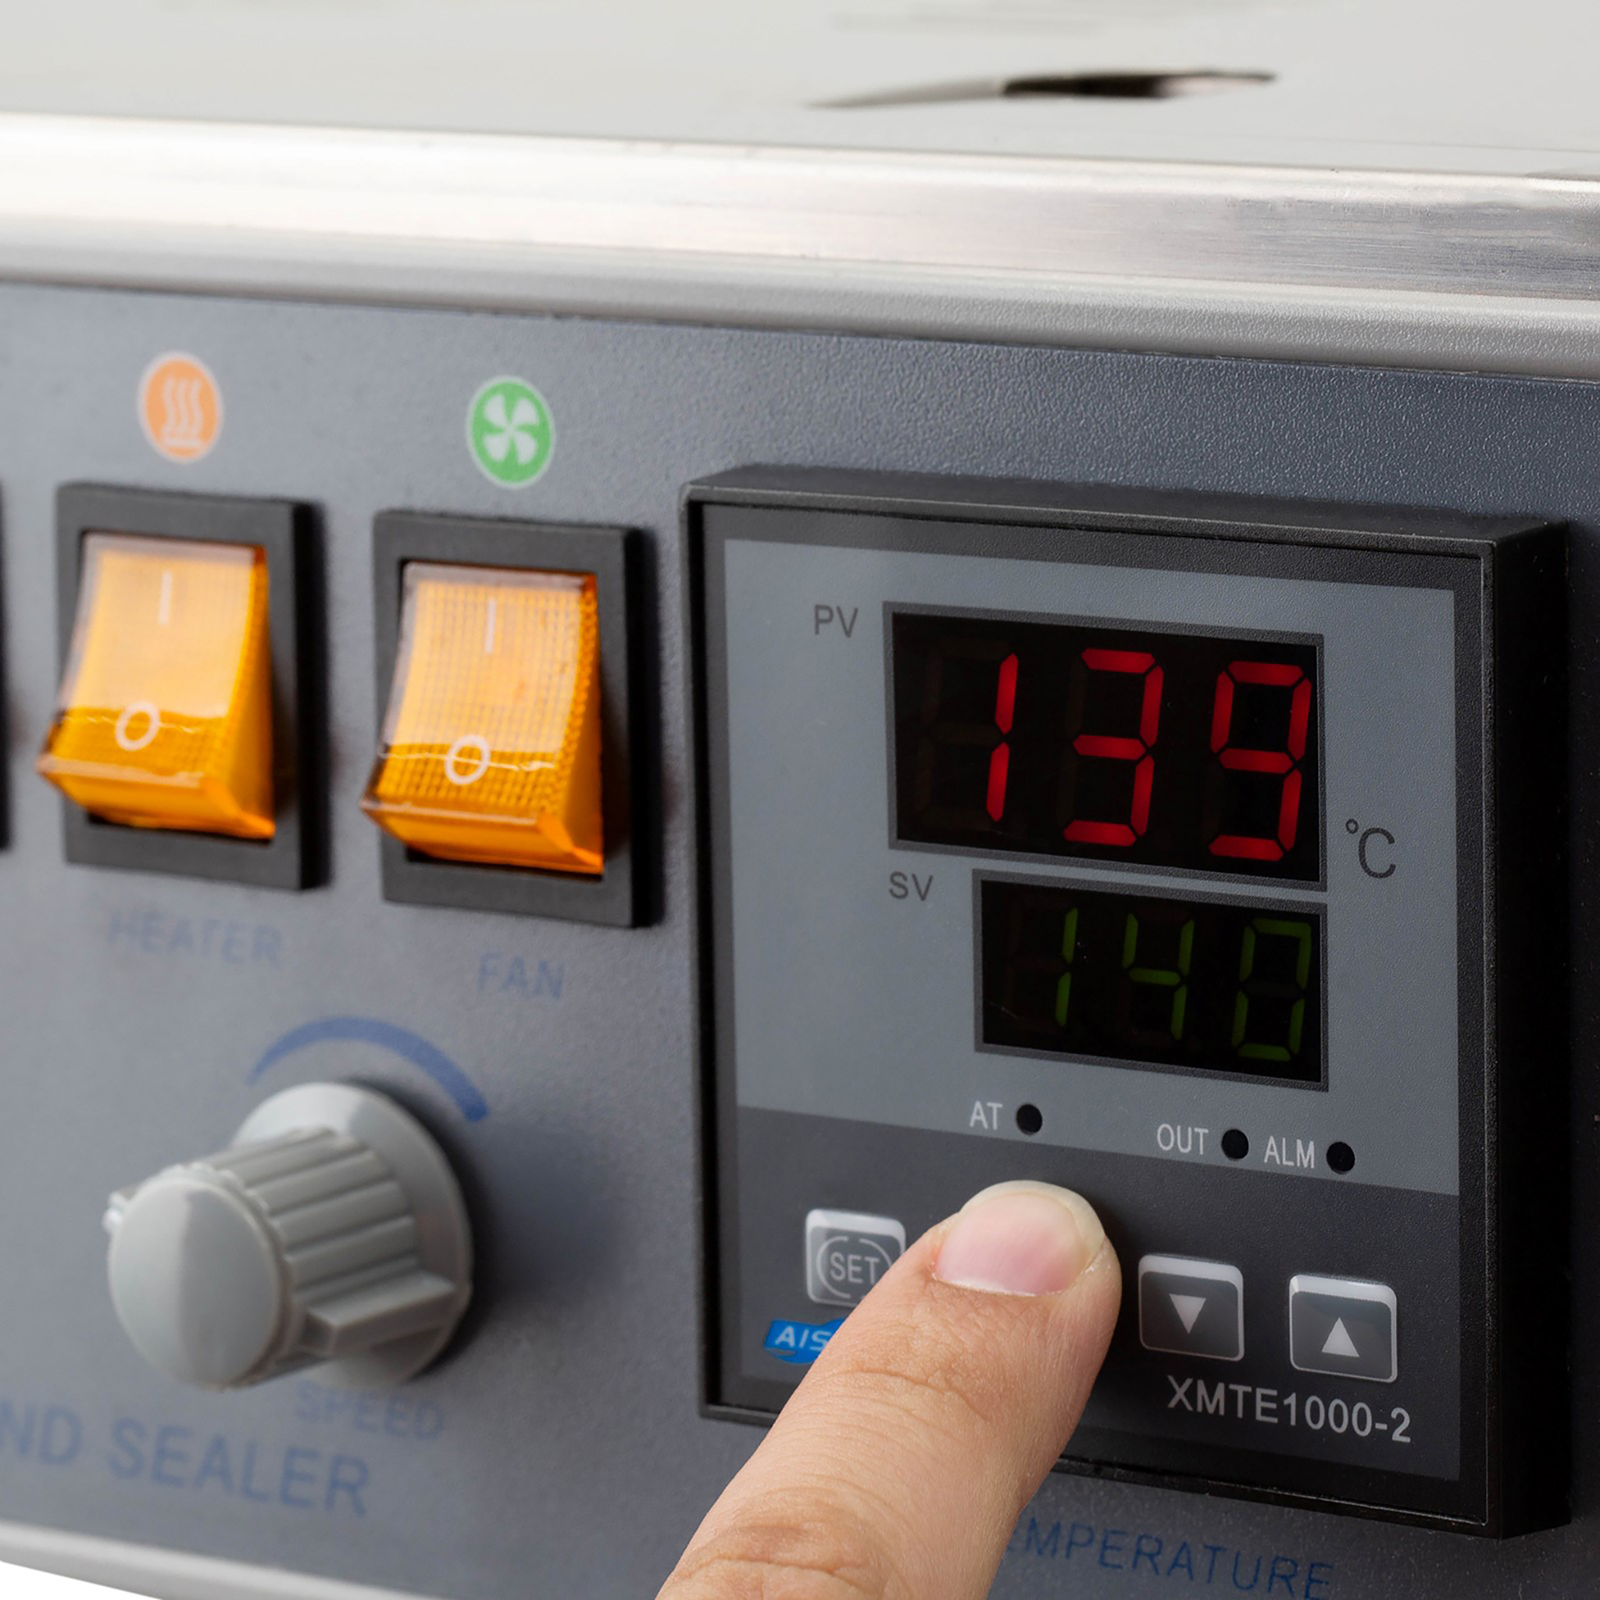 the hand of an operator setting the heating temperature on the digital panel of the JORESTECH continuous band sealer